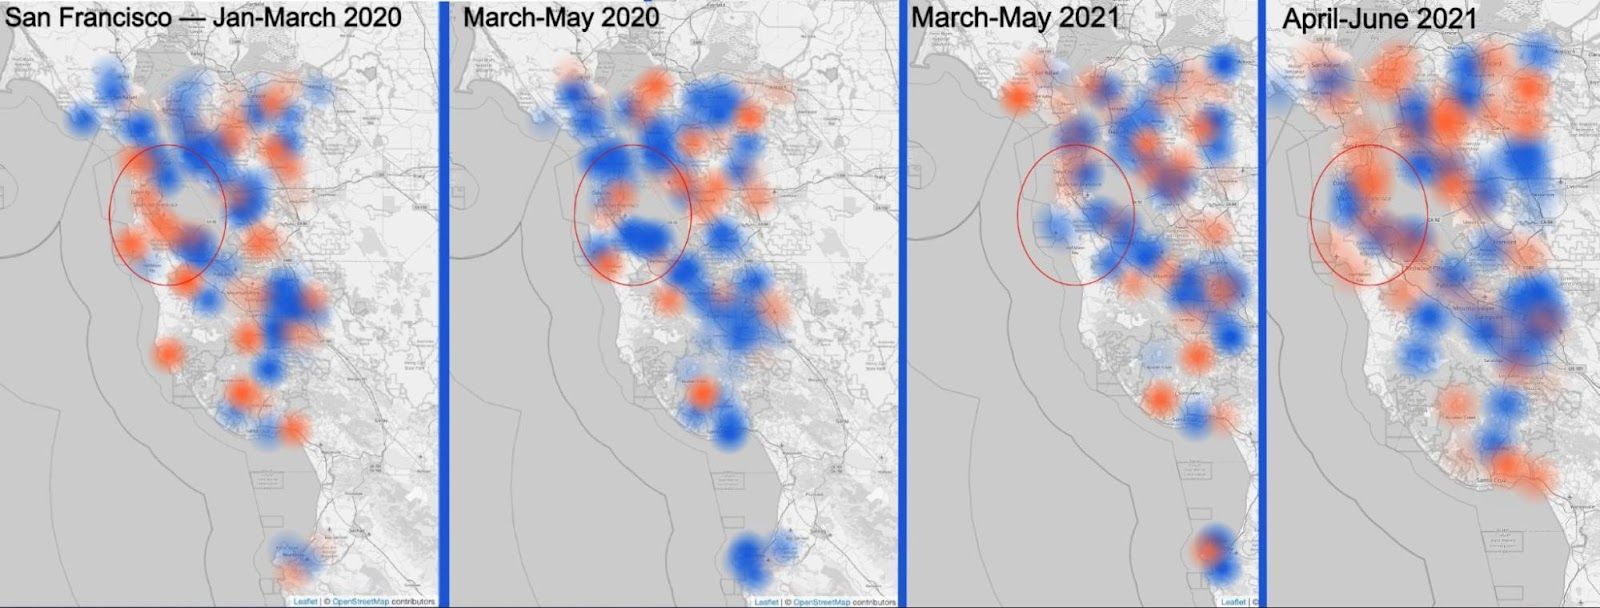 The red circles shows San Francisco and its surroundings (home of a lot of companies) in a map that compares working hours Internet use on a weekday between two months.